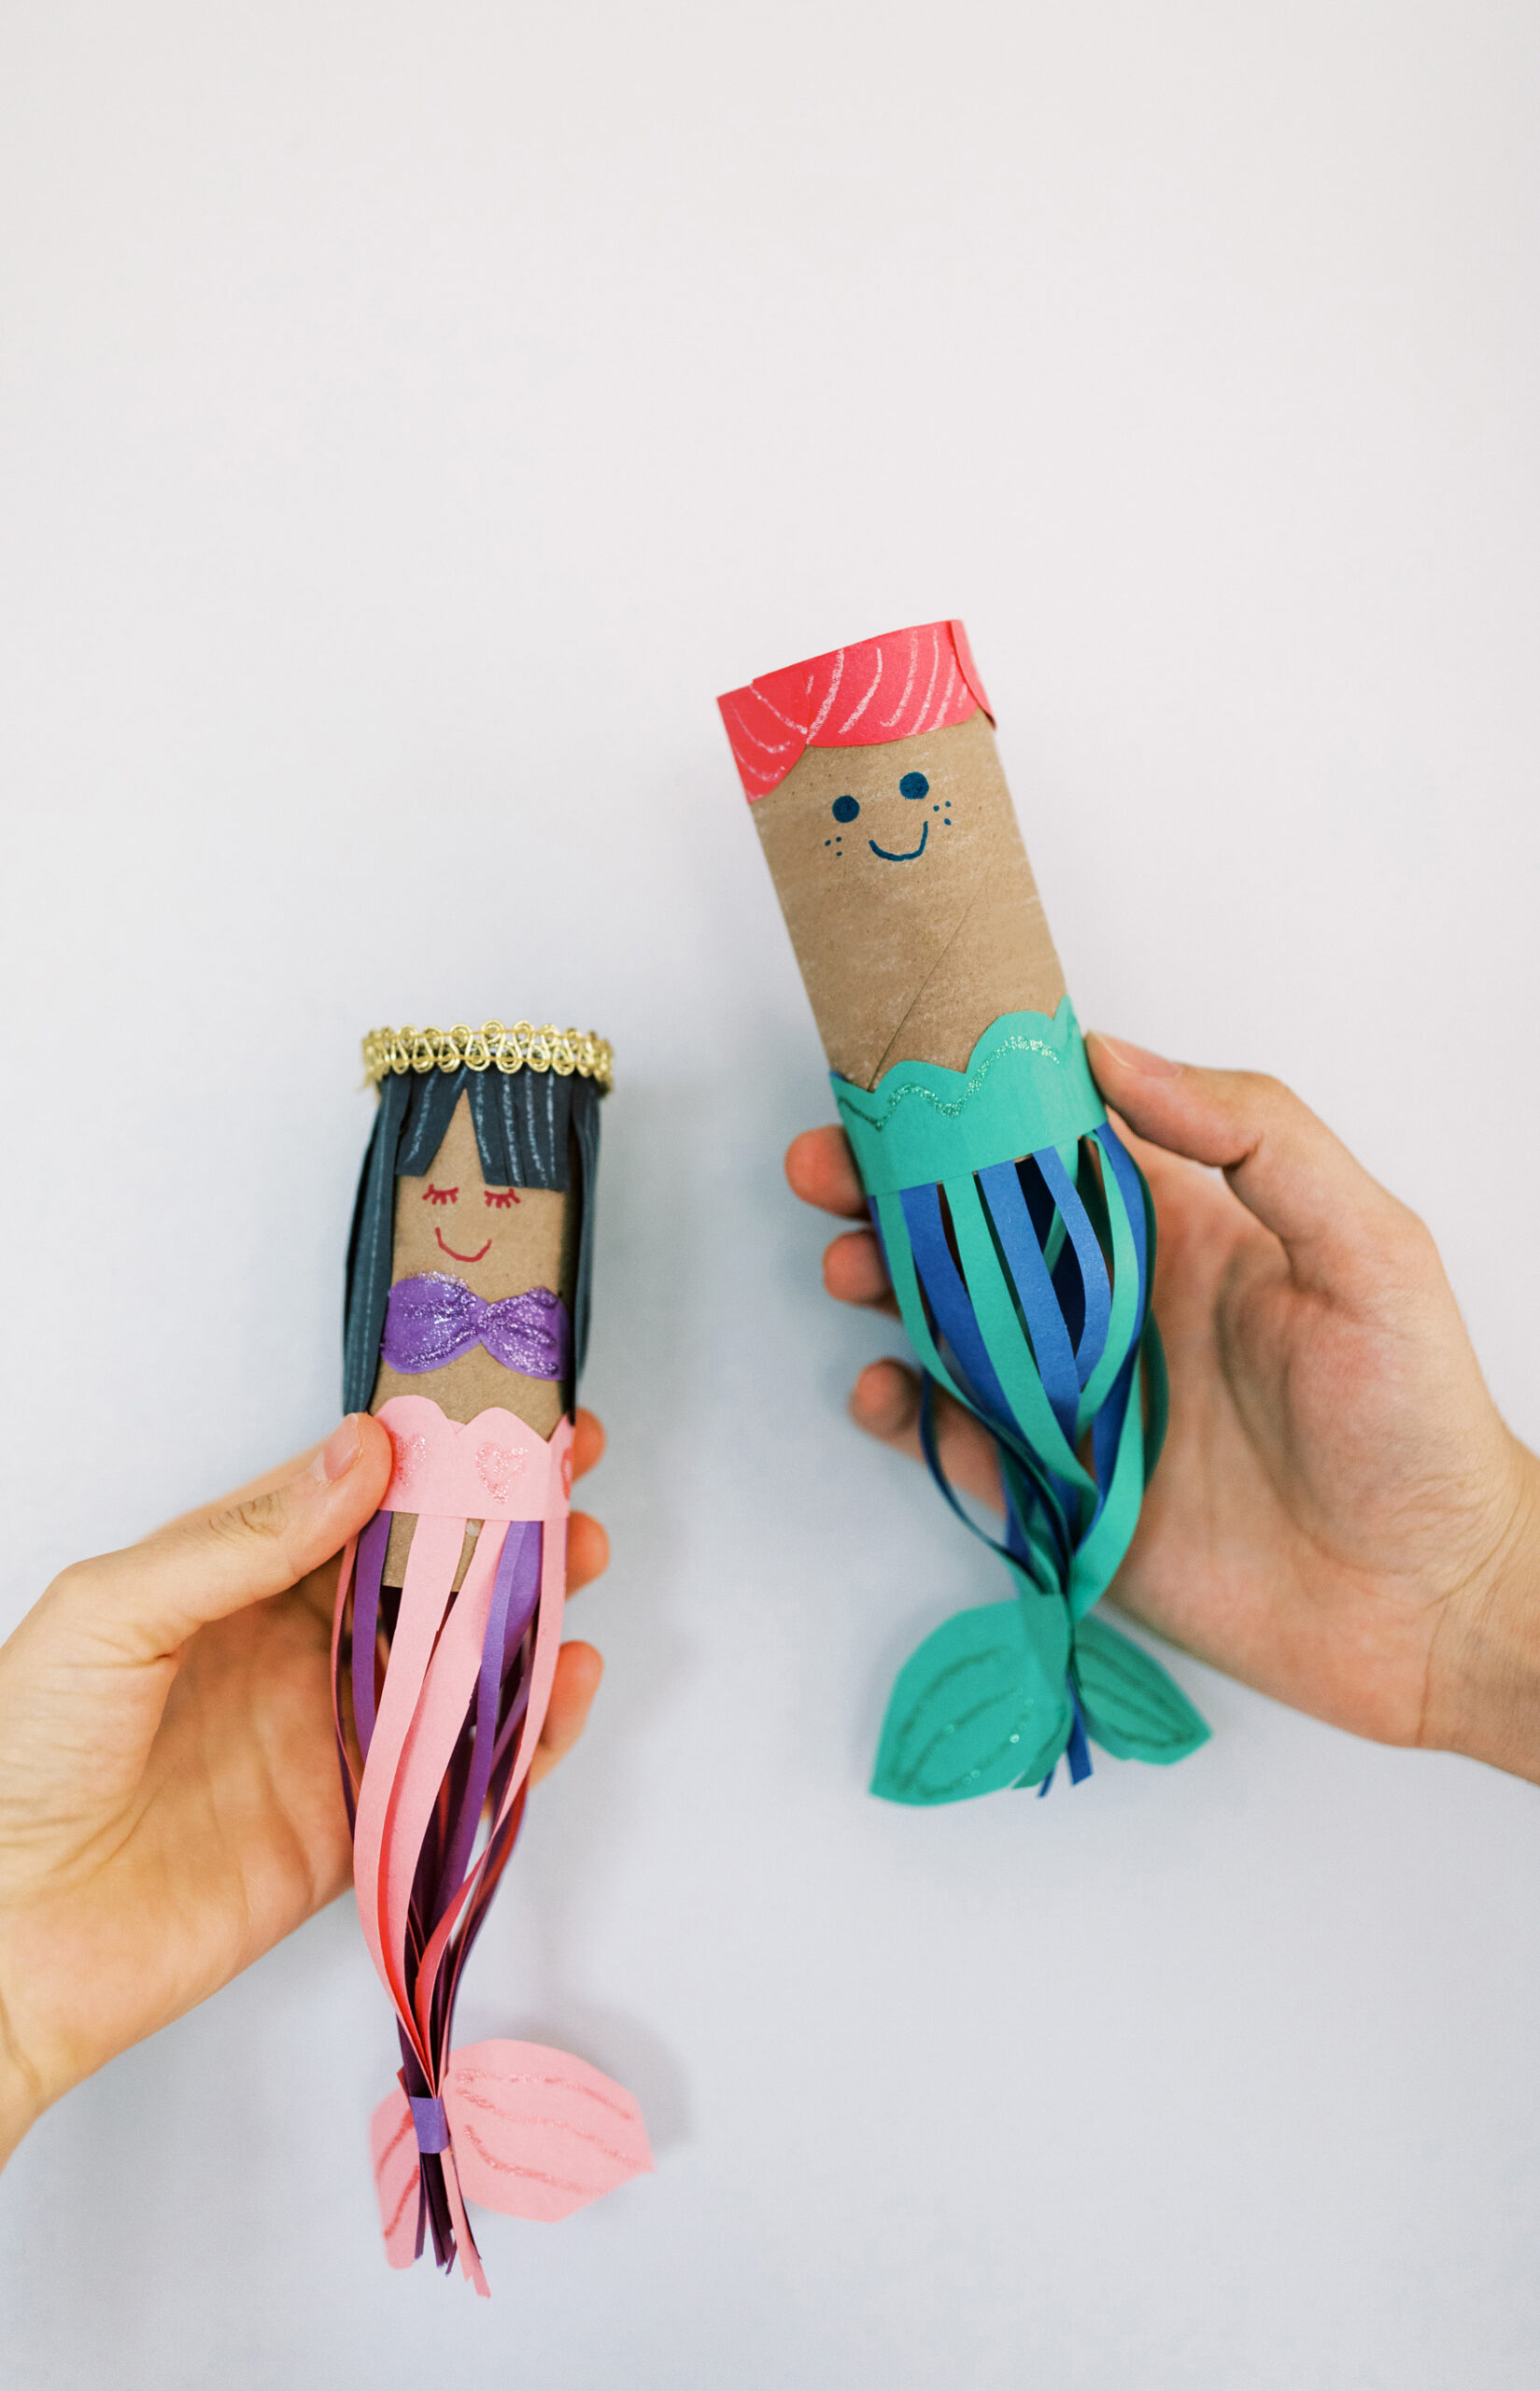 Mermaid Toilet Paper Roll Craft - Easy Crafts For Kids